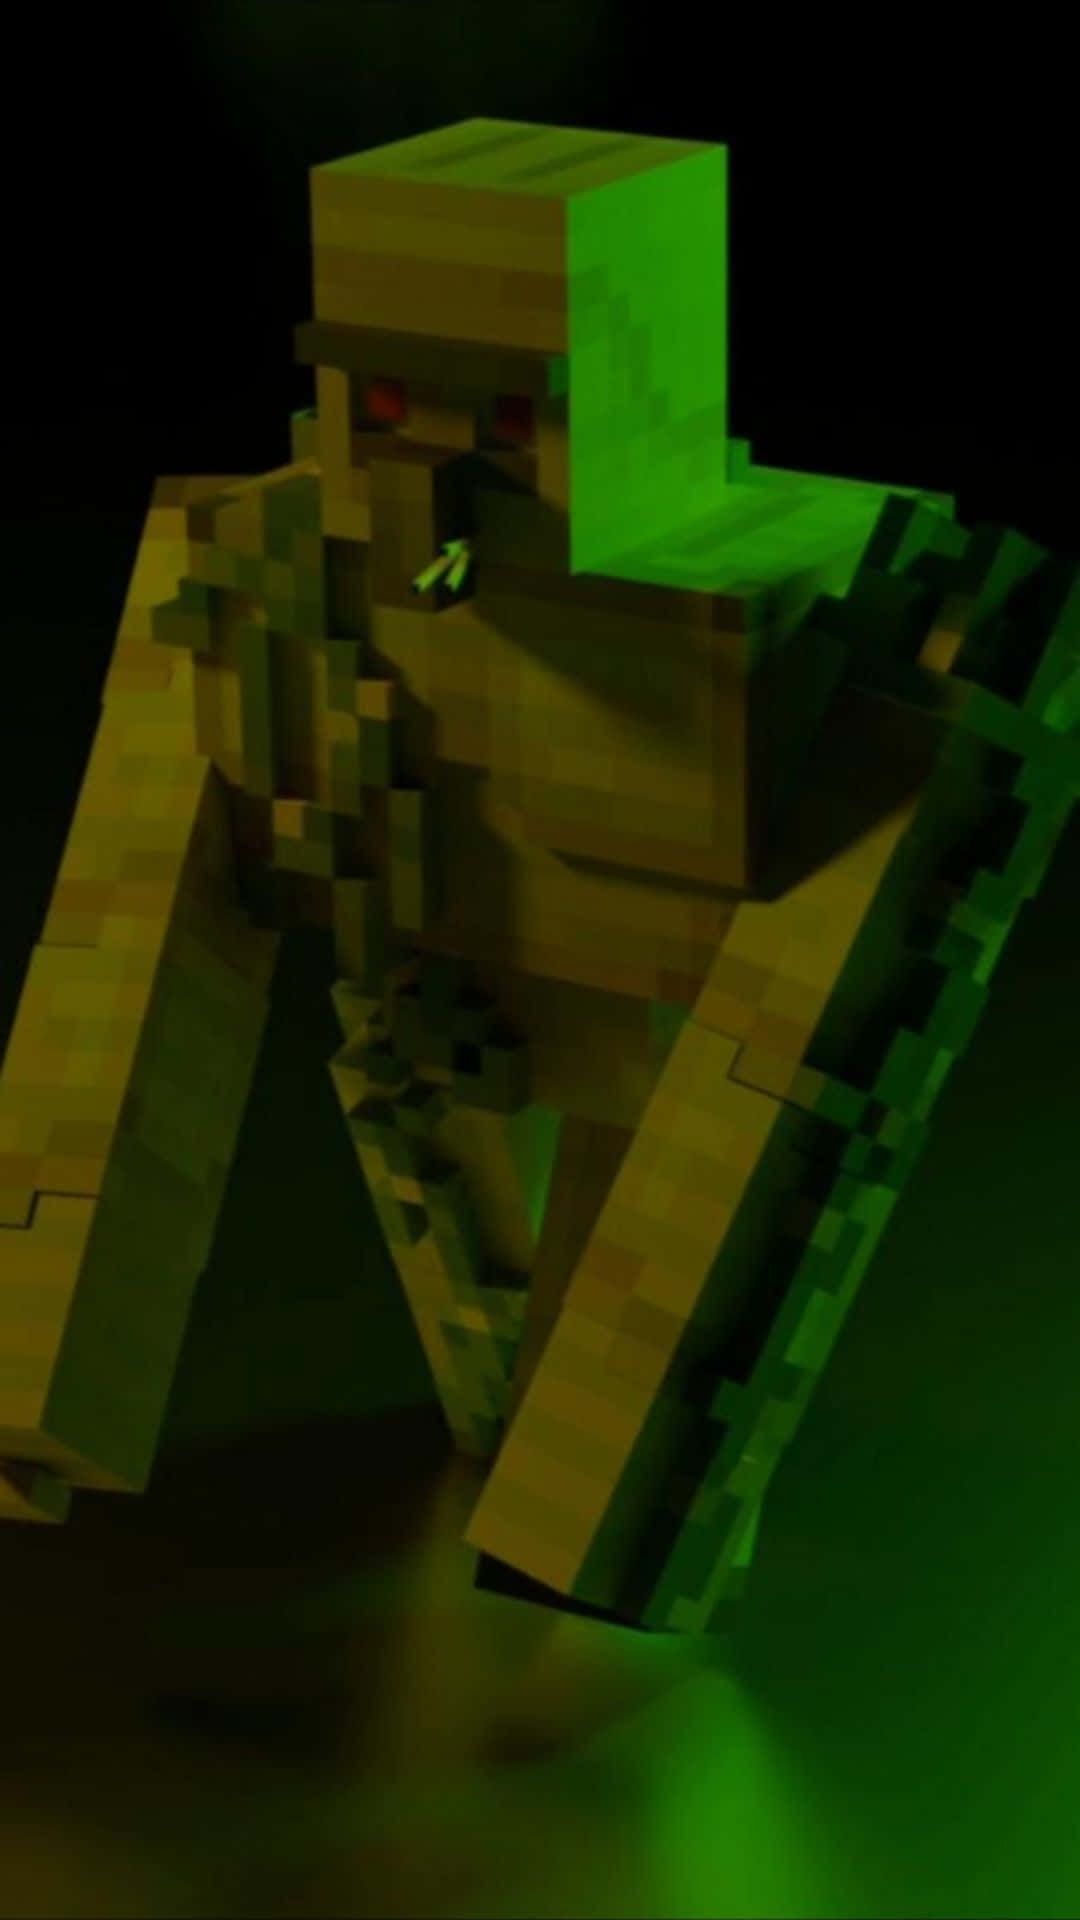 Mighty Iron Golem standing guard in a Minecraft village Wallpaper